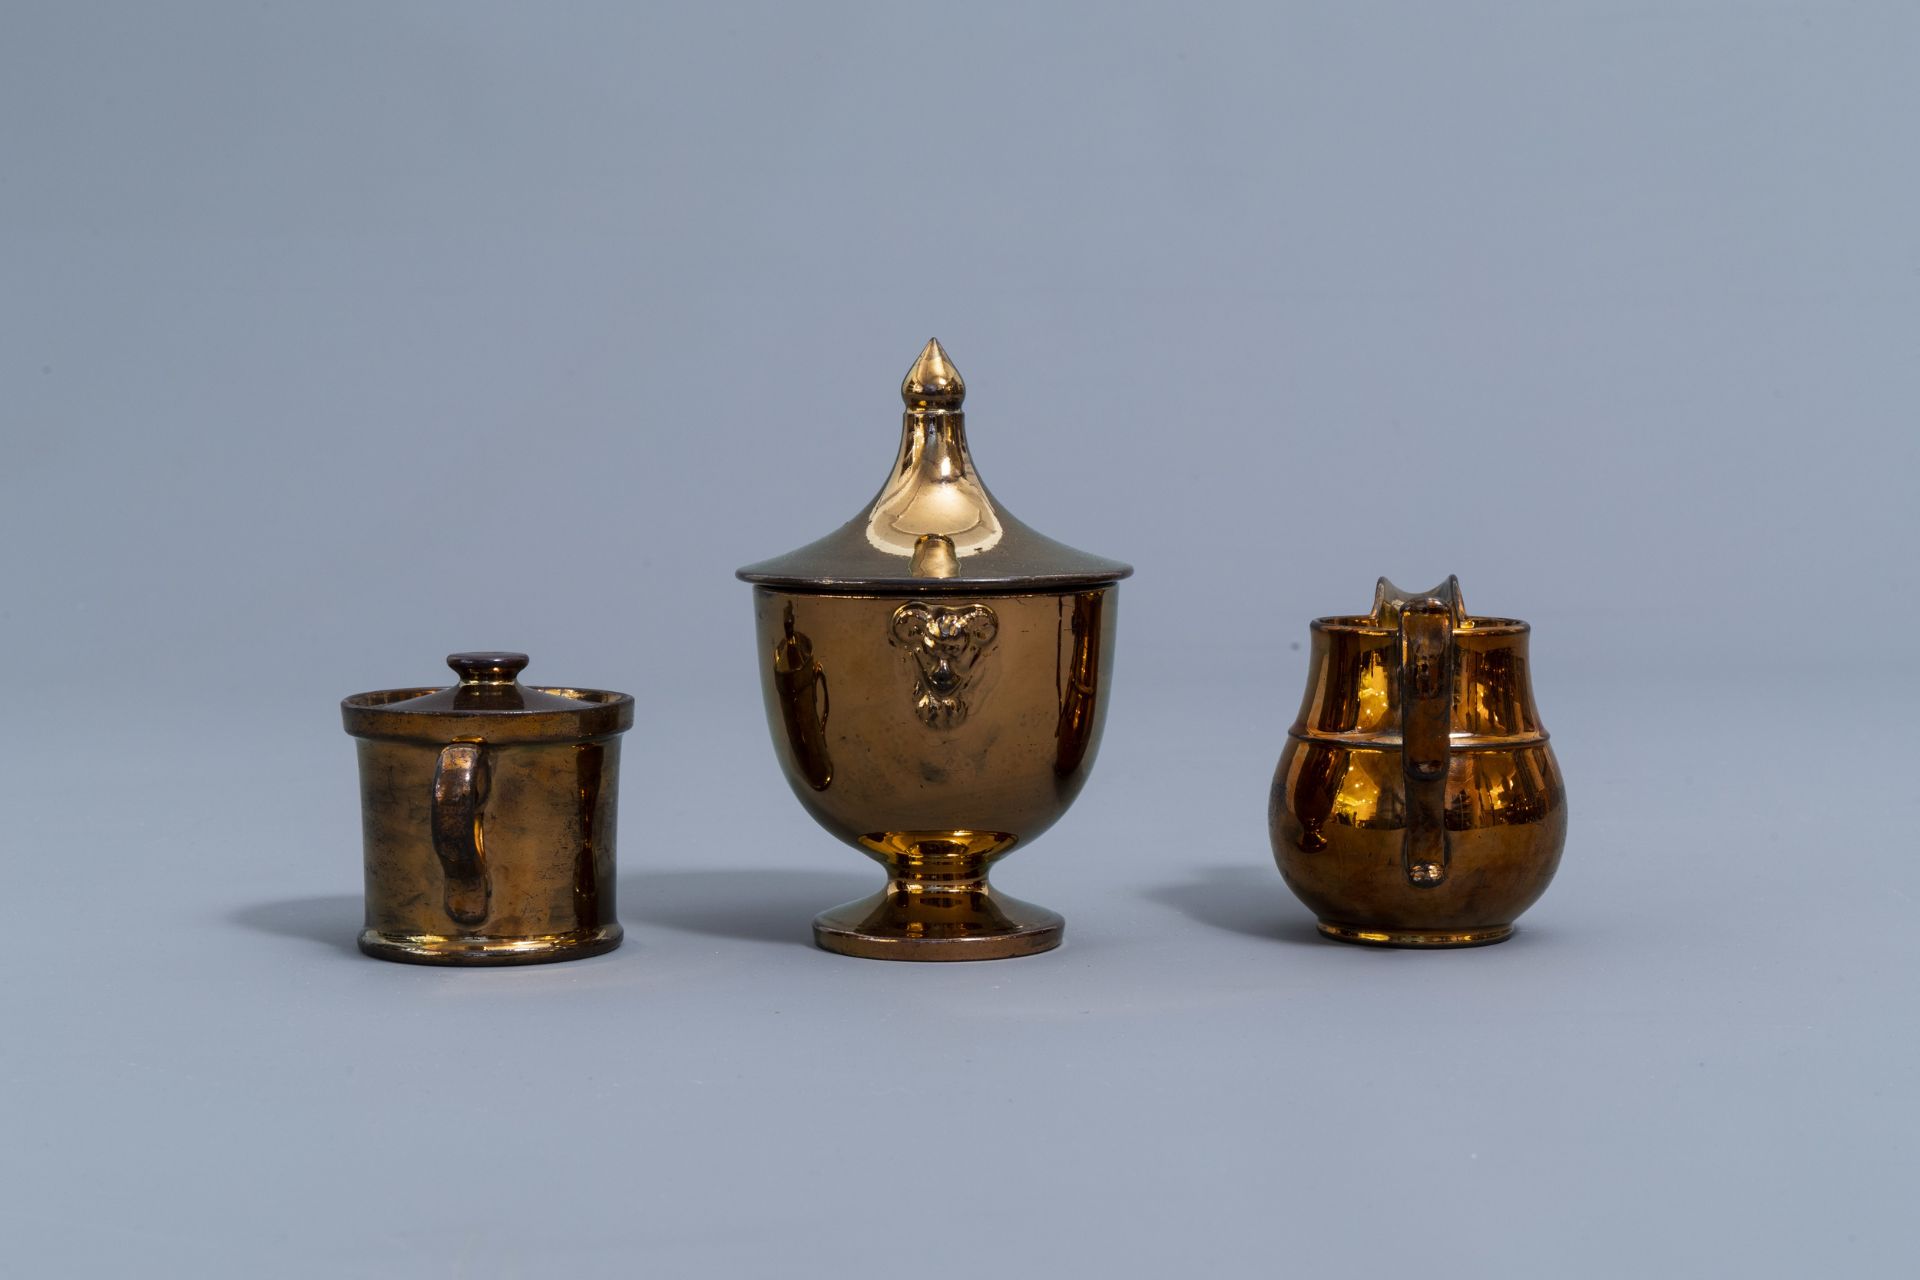 A varied collection of English monochrome copper lustreware items, 19th C. - Image 18 of 50